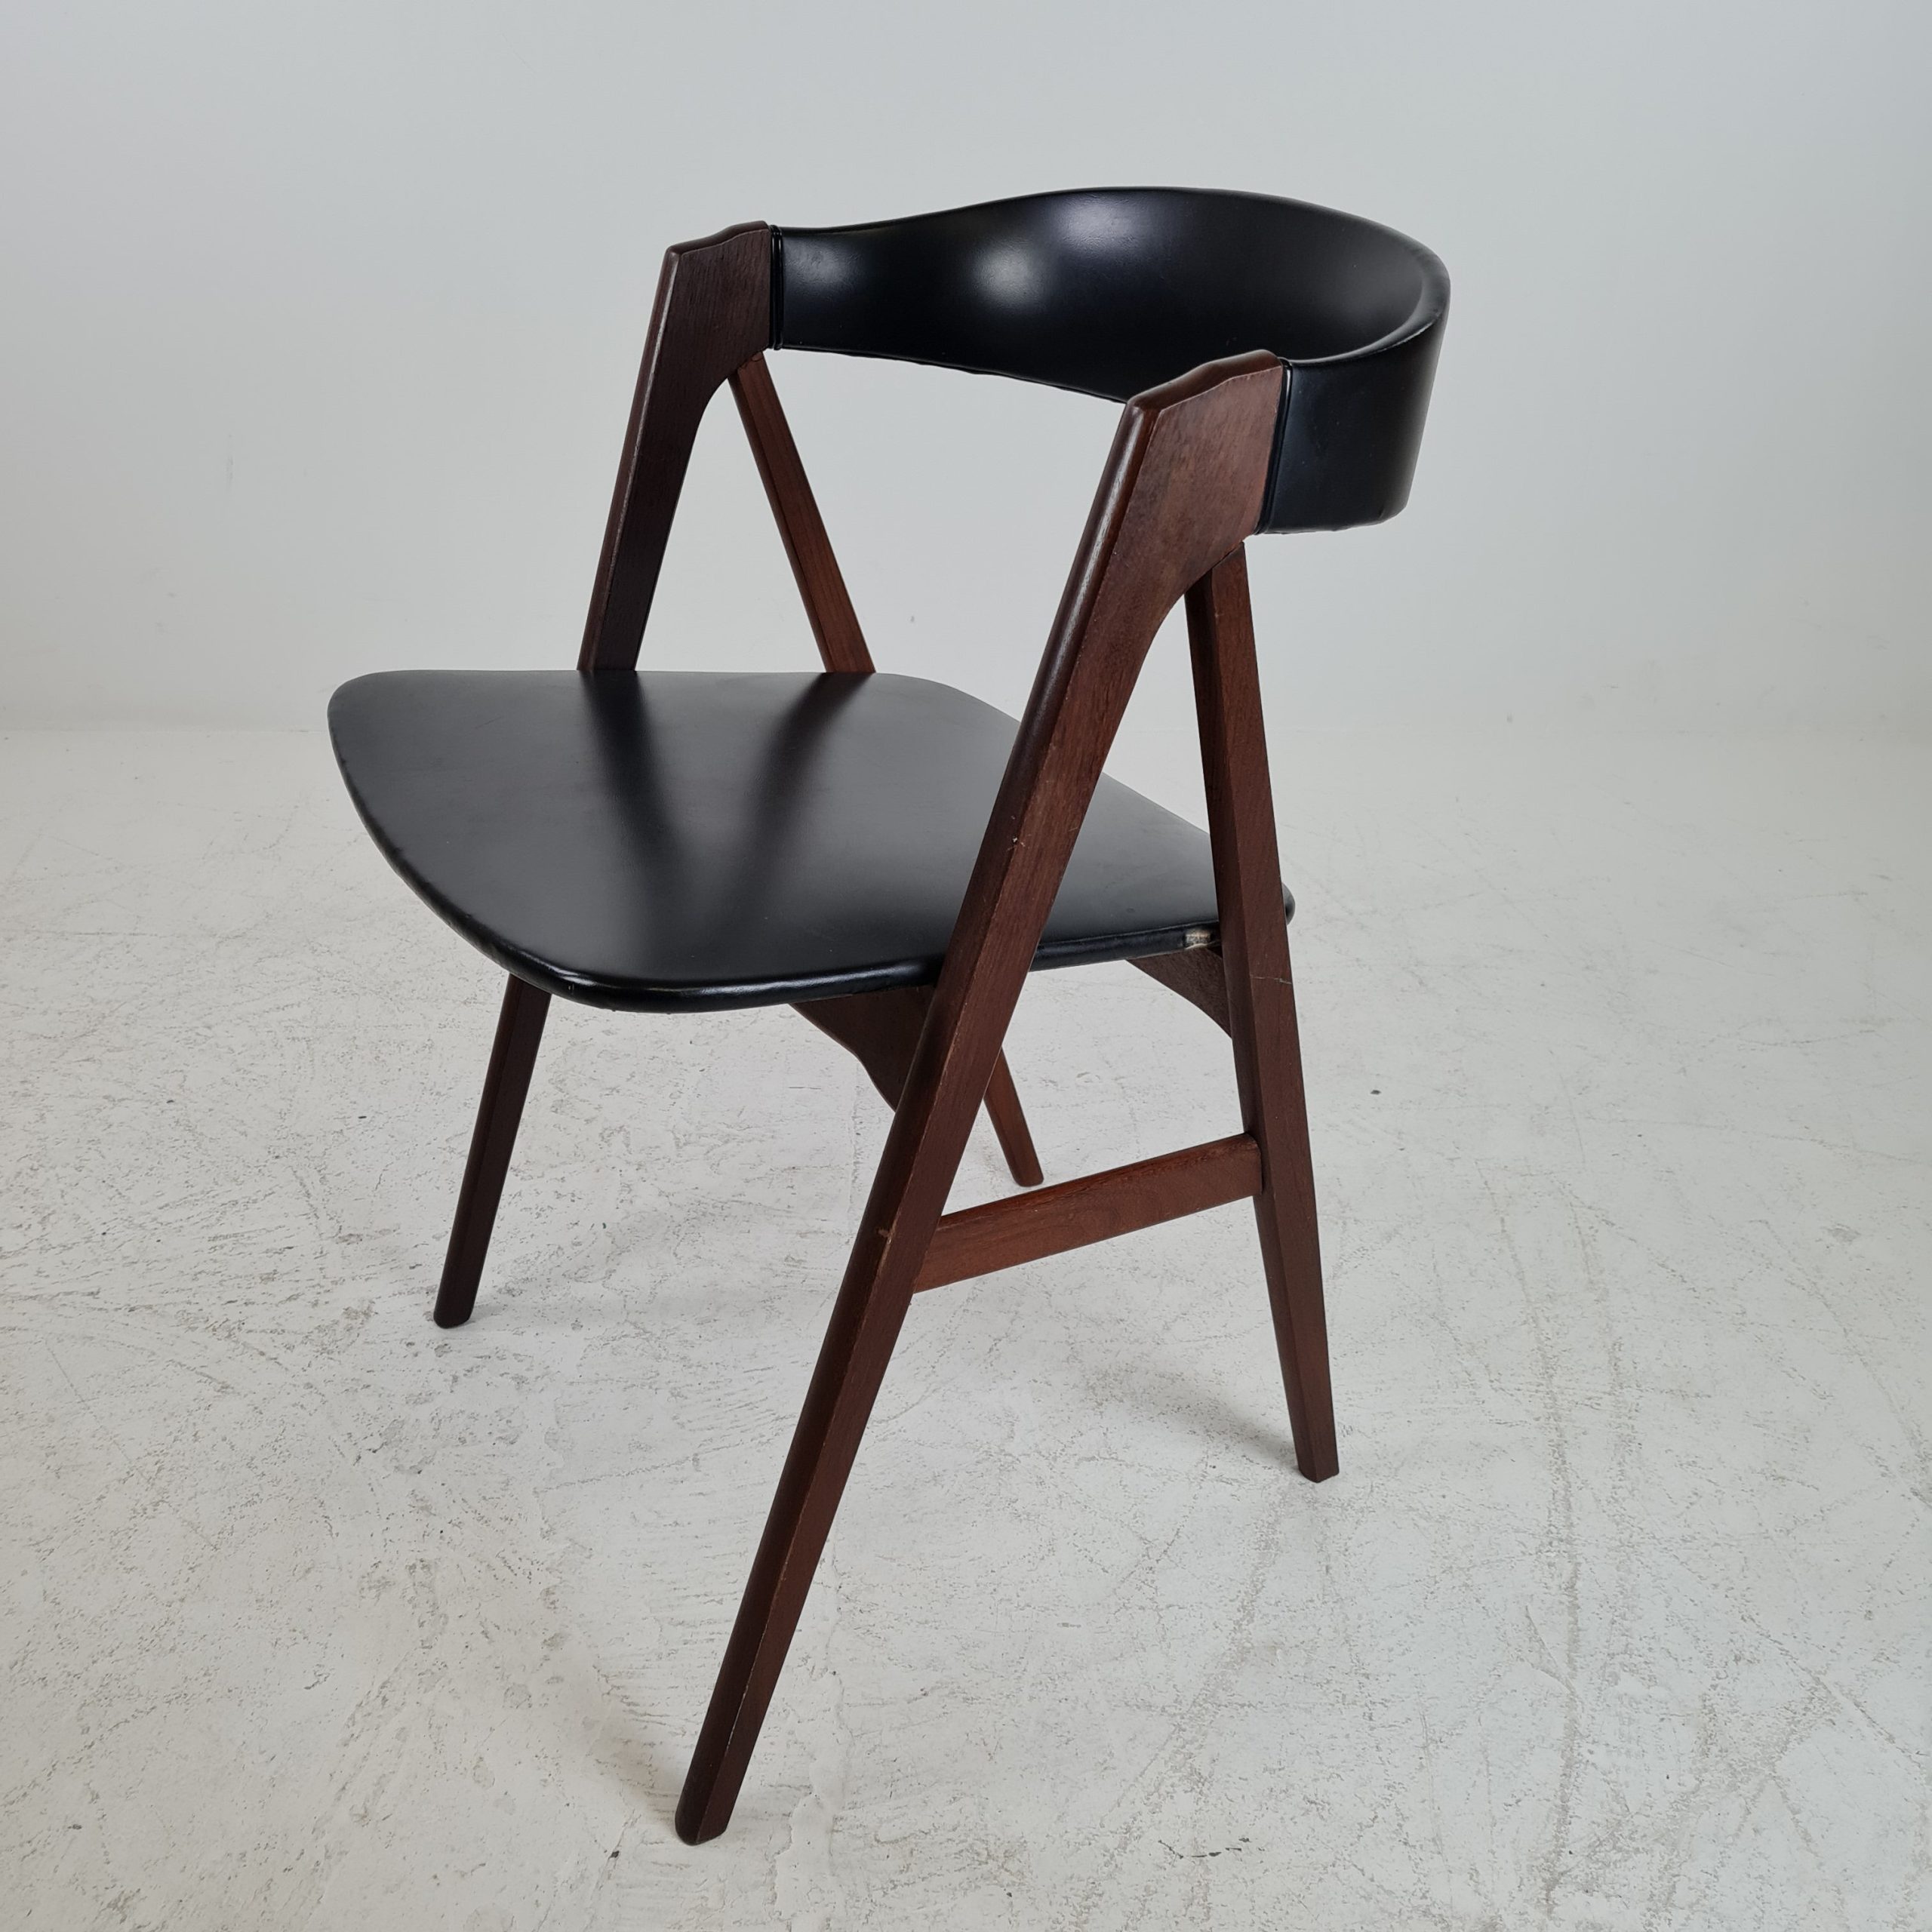 Dining table chair | Model 205 | Theodor Harlev | Farstrup chair factory